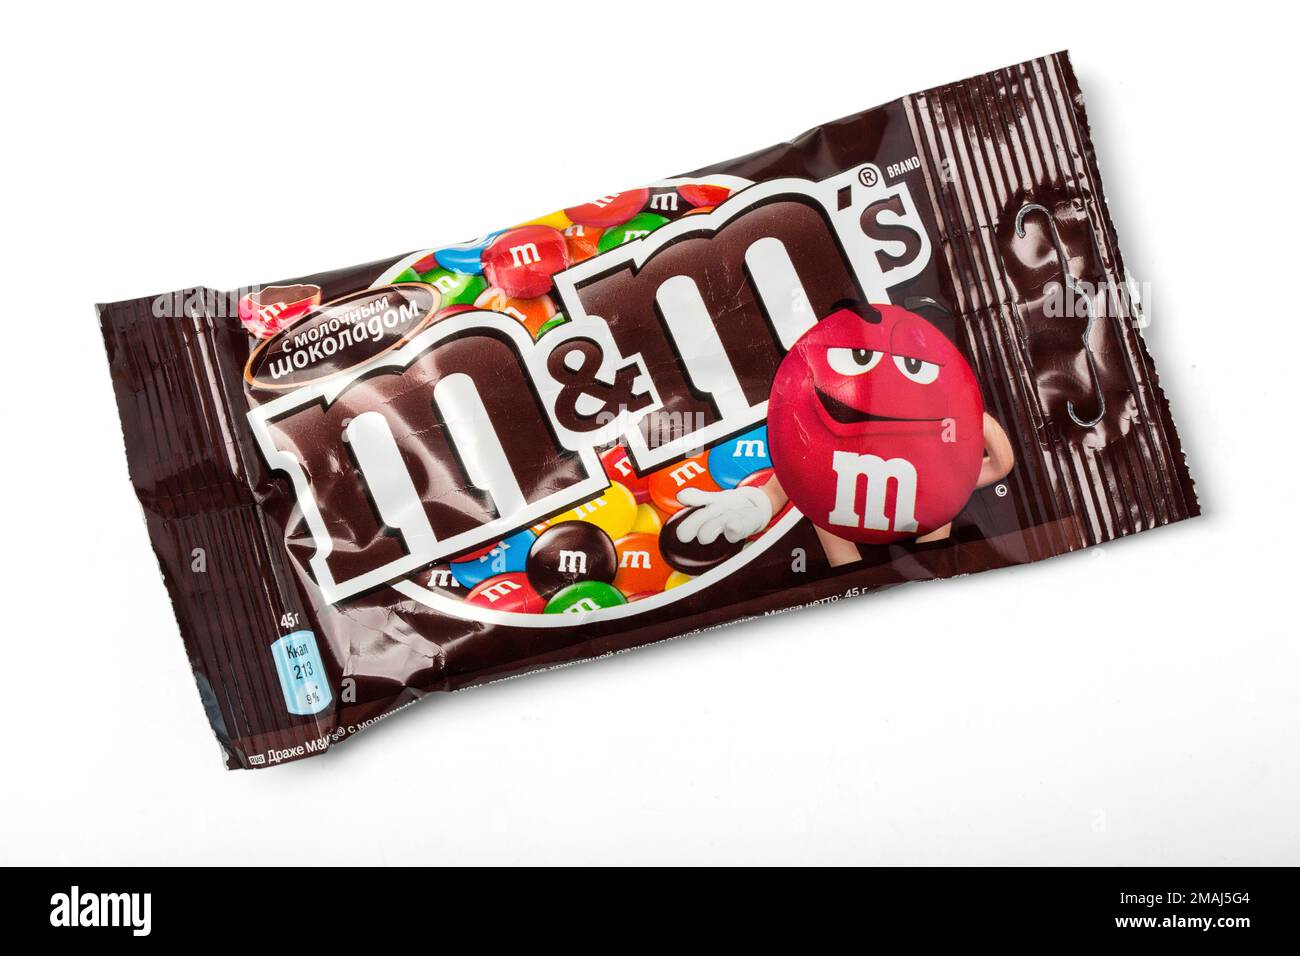 Peanut M&M's (old wrapper), Candy Bar Wrappers